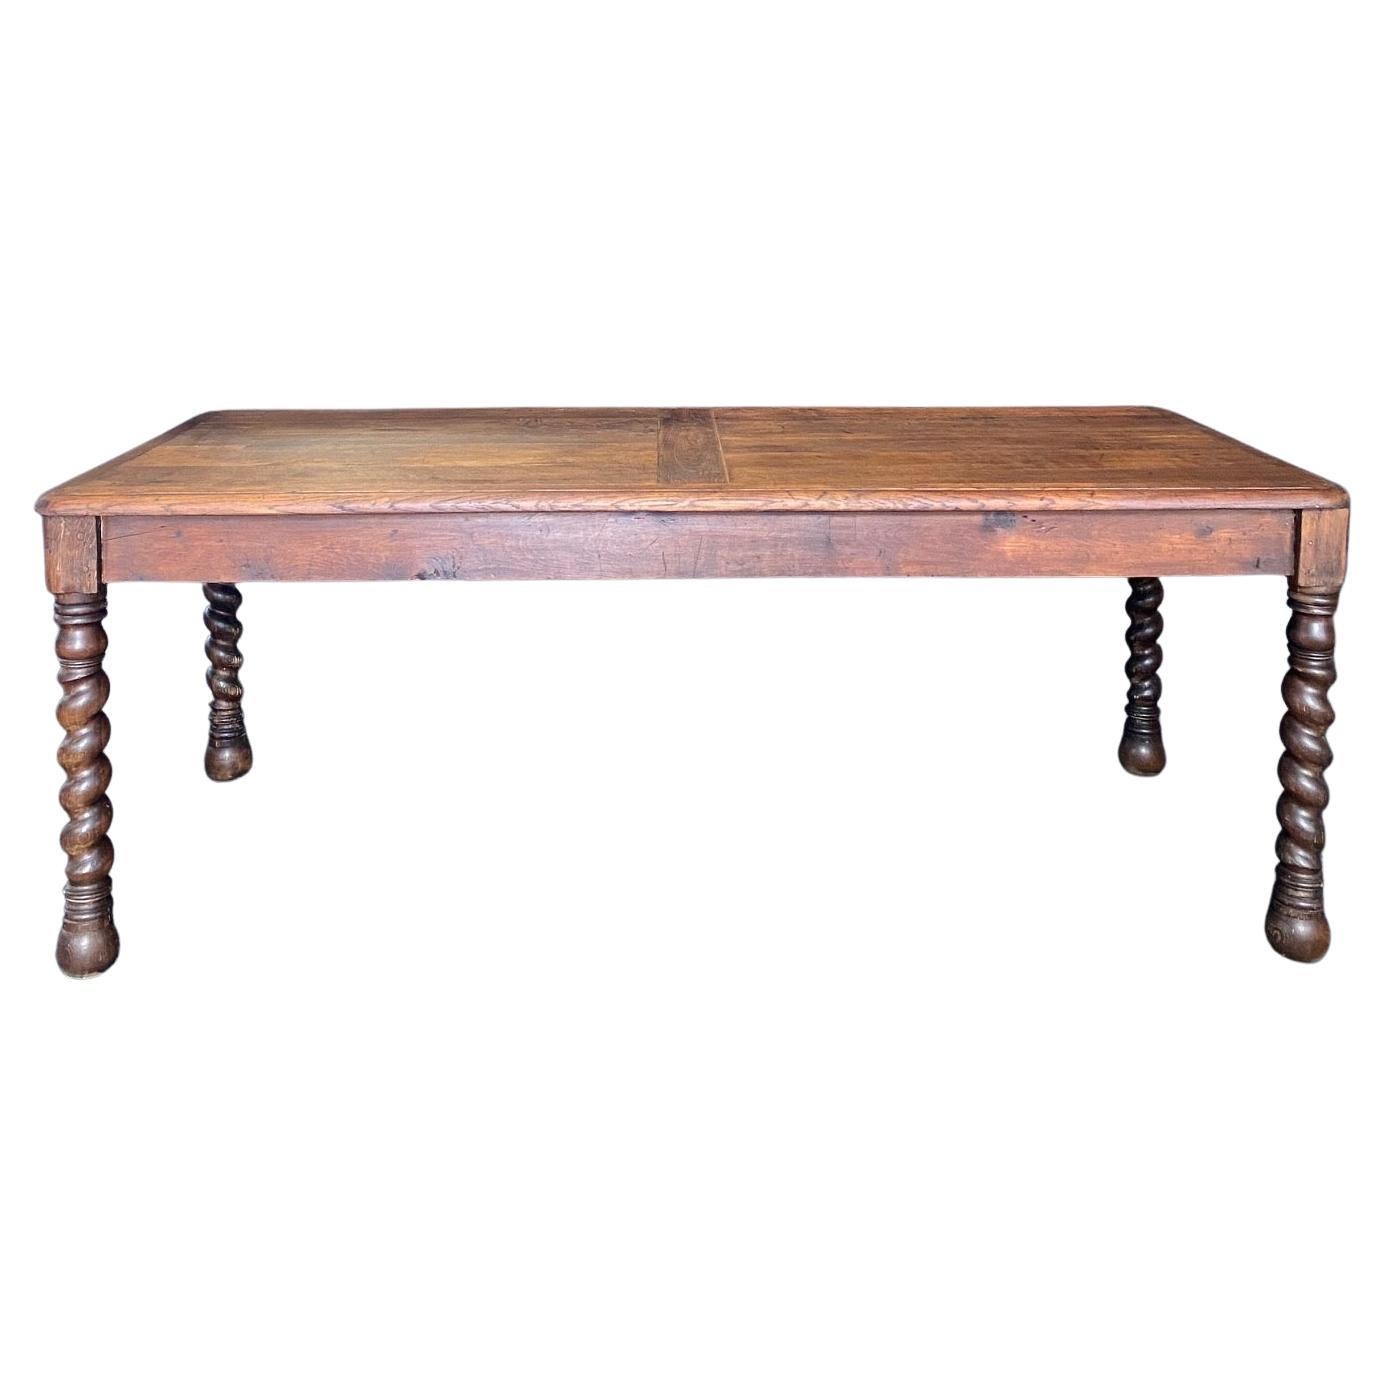 Handsome French 19th Century Oak Barley Twist Dining Table